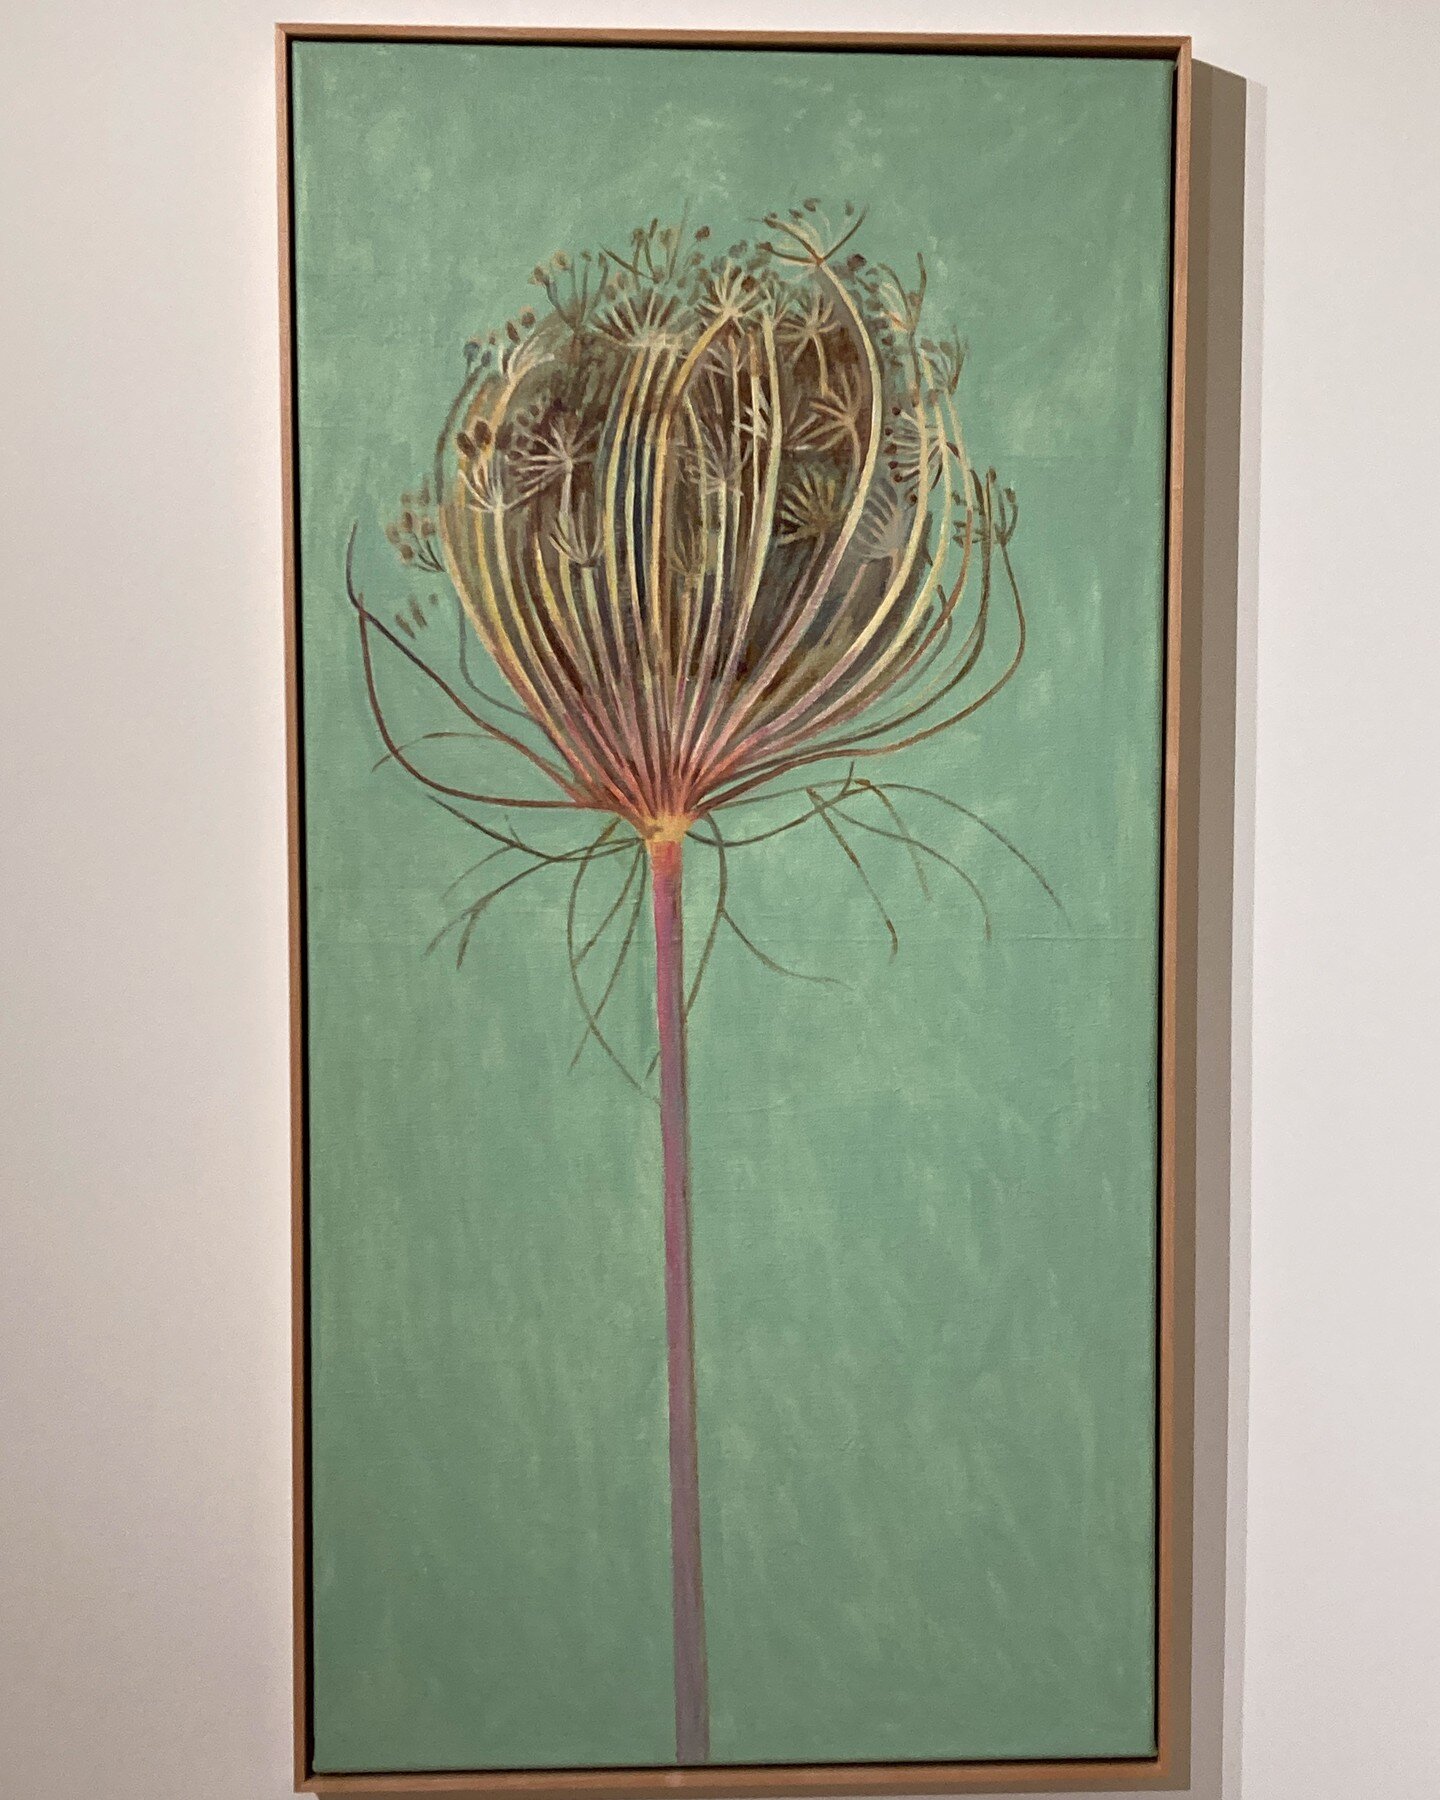 We were thrilled to see the beautiful paintings of Lois Dodd at the Hall Art Foundation in Vermont. 

Queen Anne's Lace, 2017
#loisdodd 

For more information on the exhibit, visit @hall_art_foundation

-
-
-
-
-
#hallartfoundation #loisdodd #nycarch